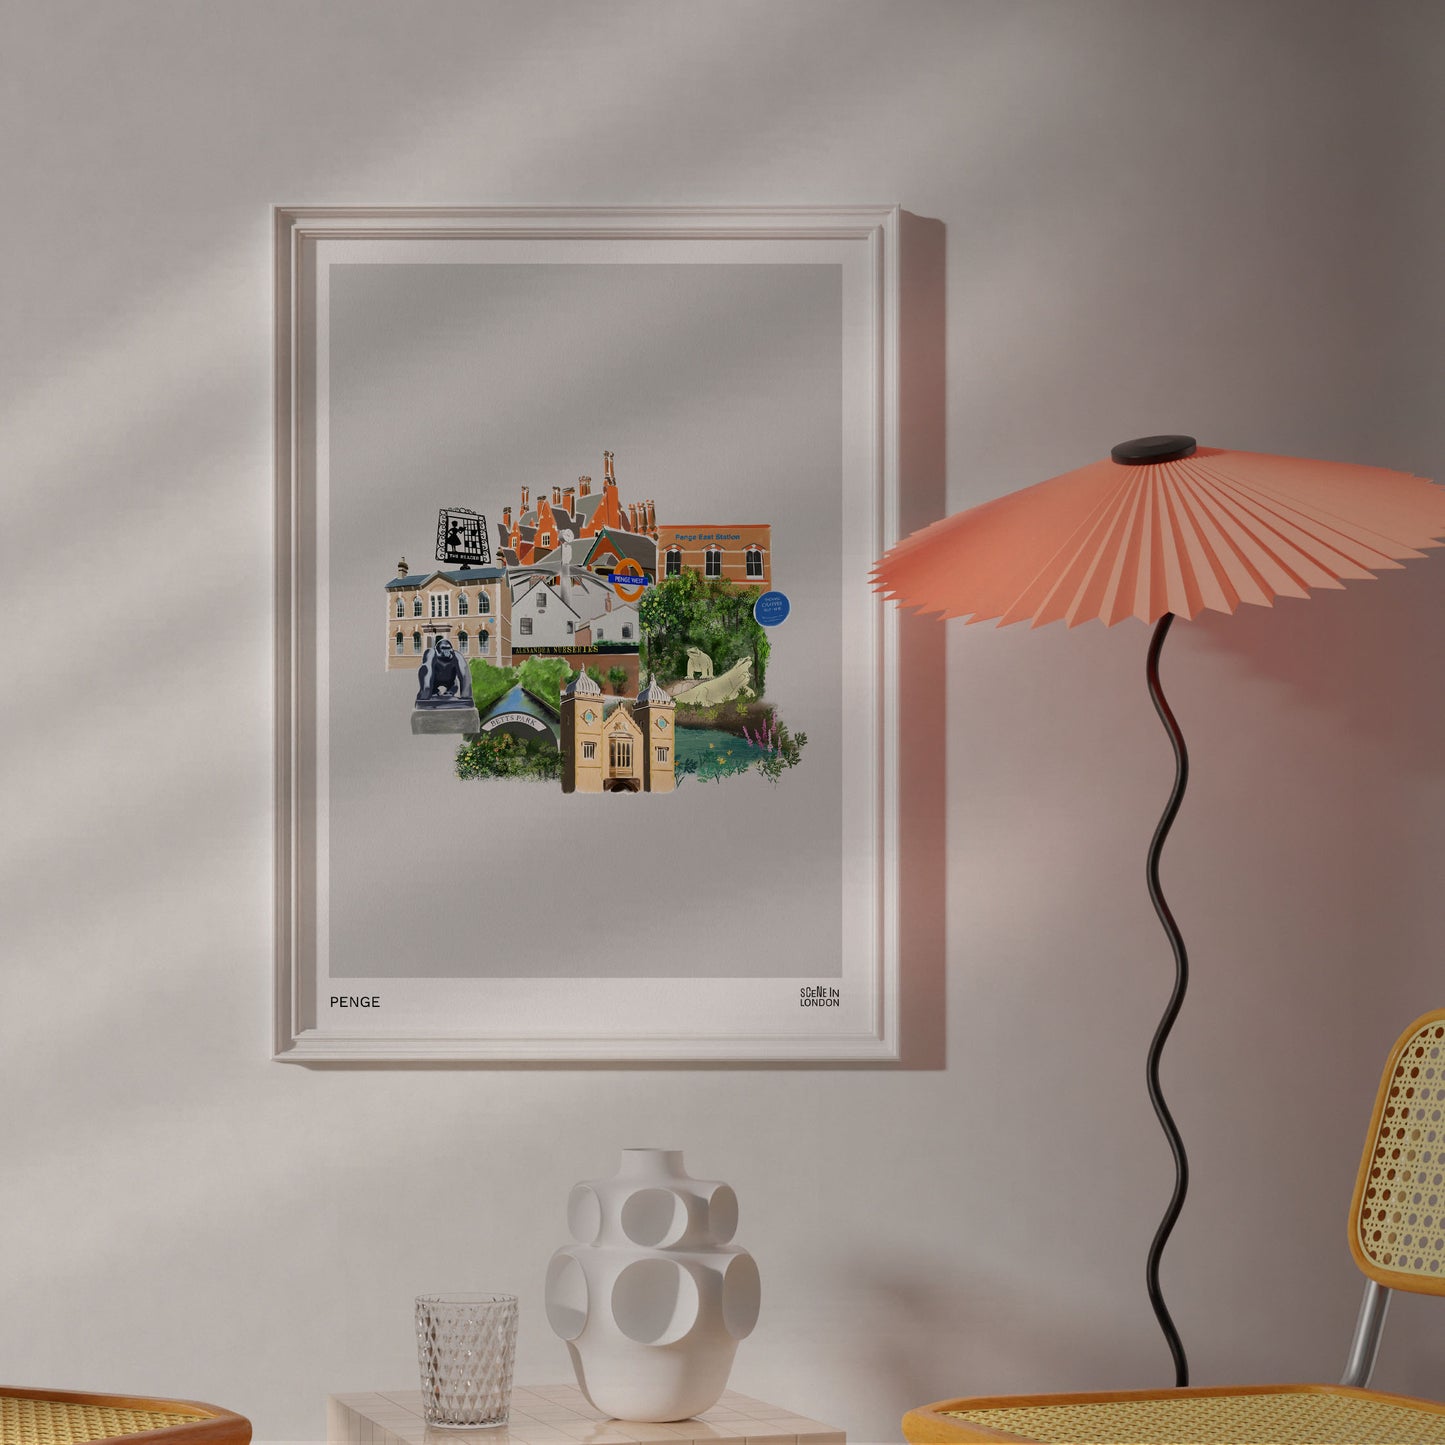 Penge London art print with places in Penge